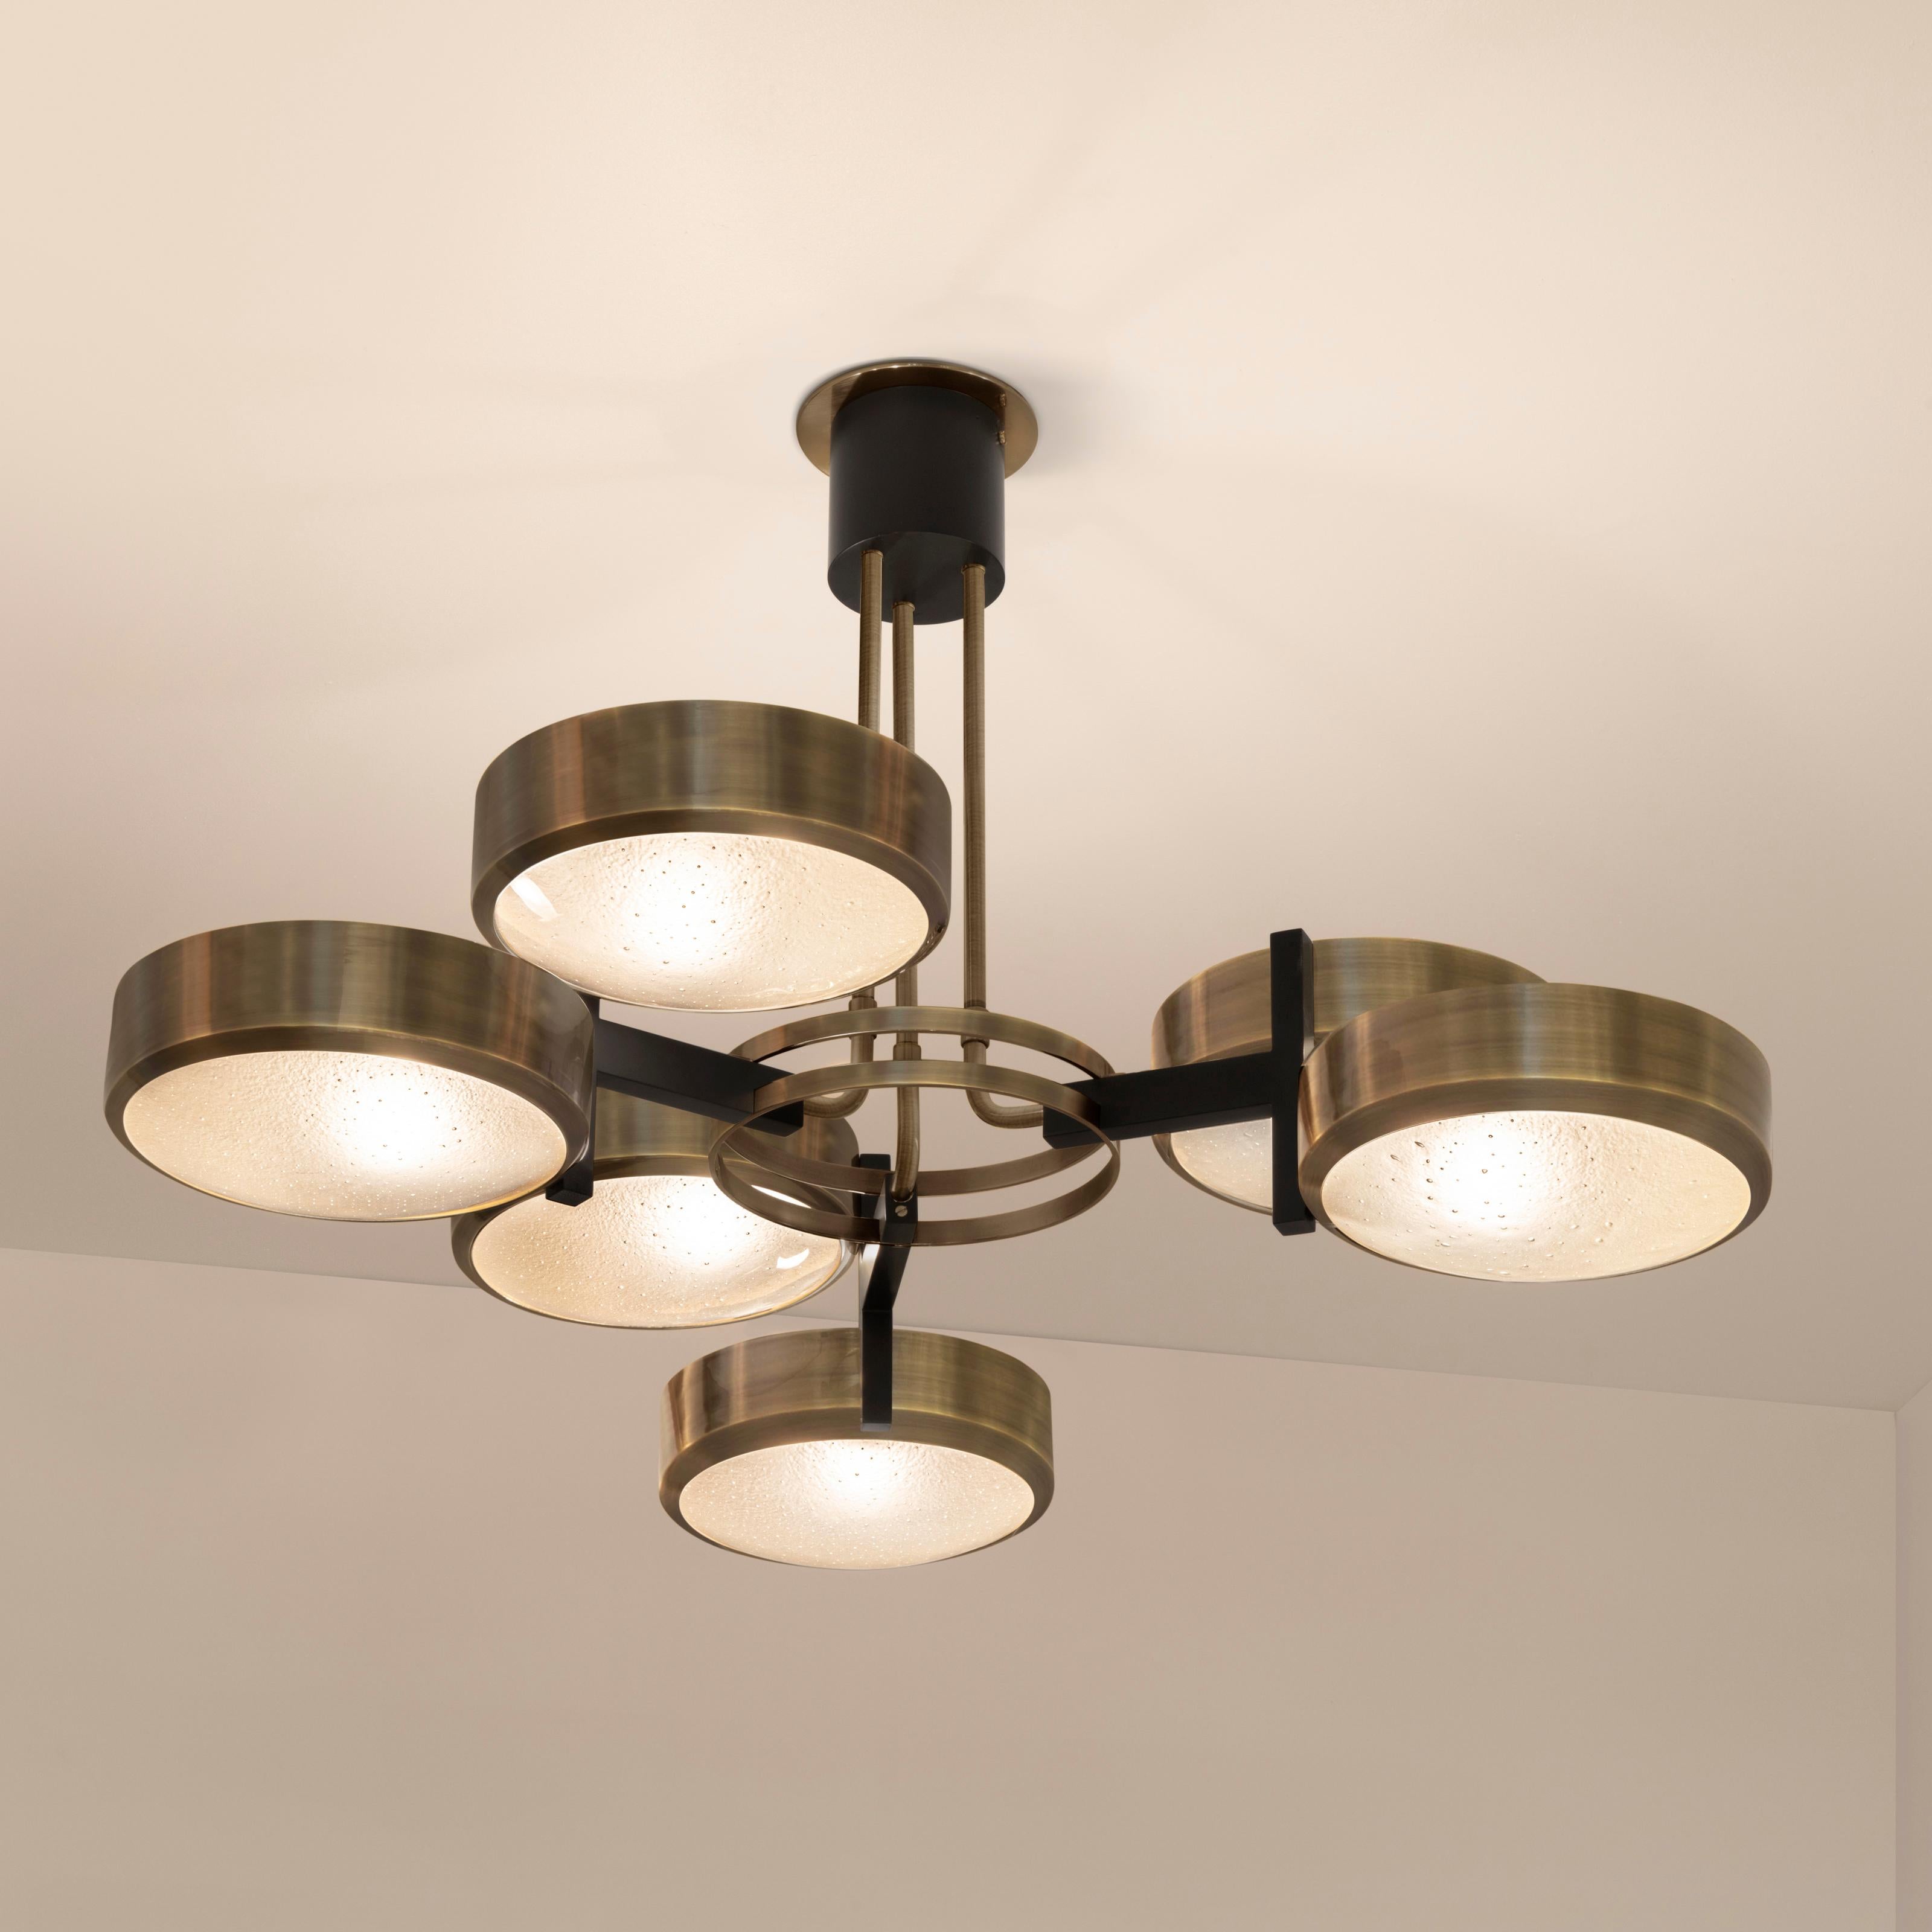 Modern Eclissi Ceiling Light by Gaspare Asaro - Bronze Finish Murano Glass Version For Sale